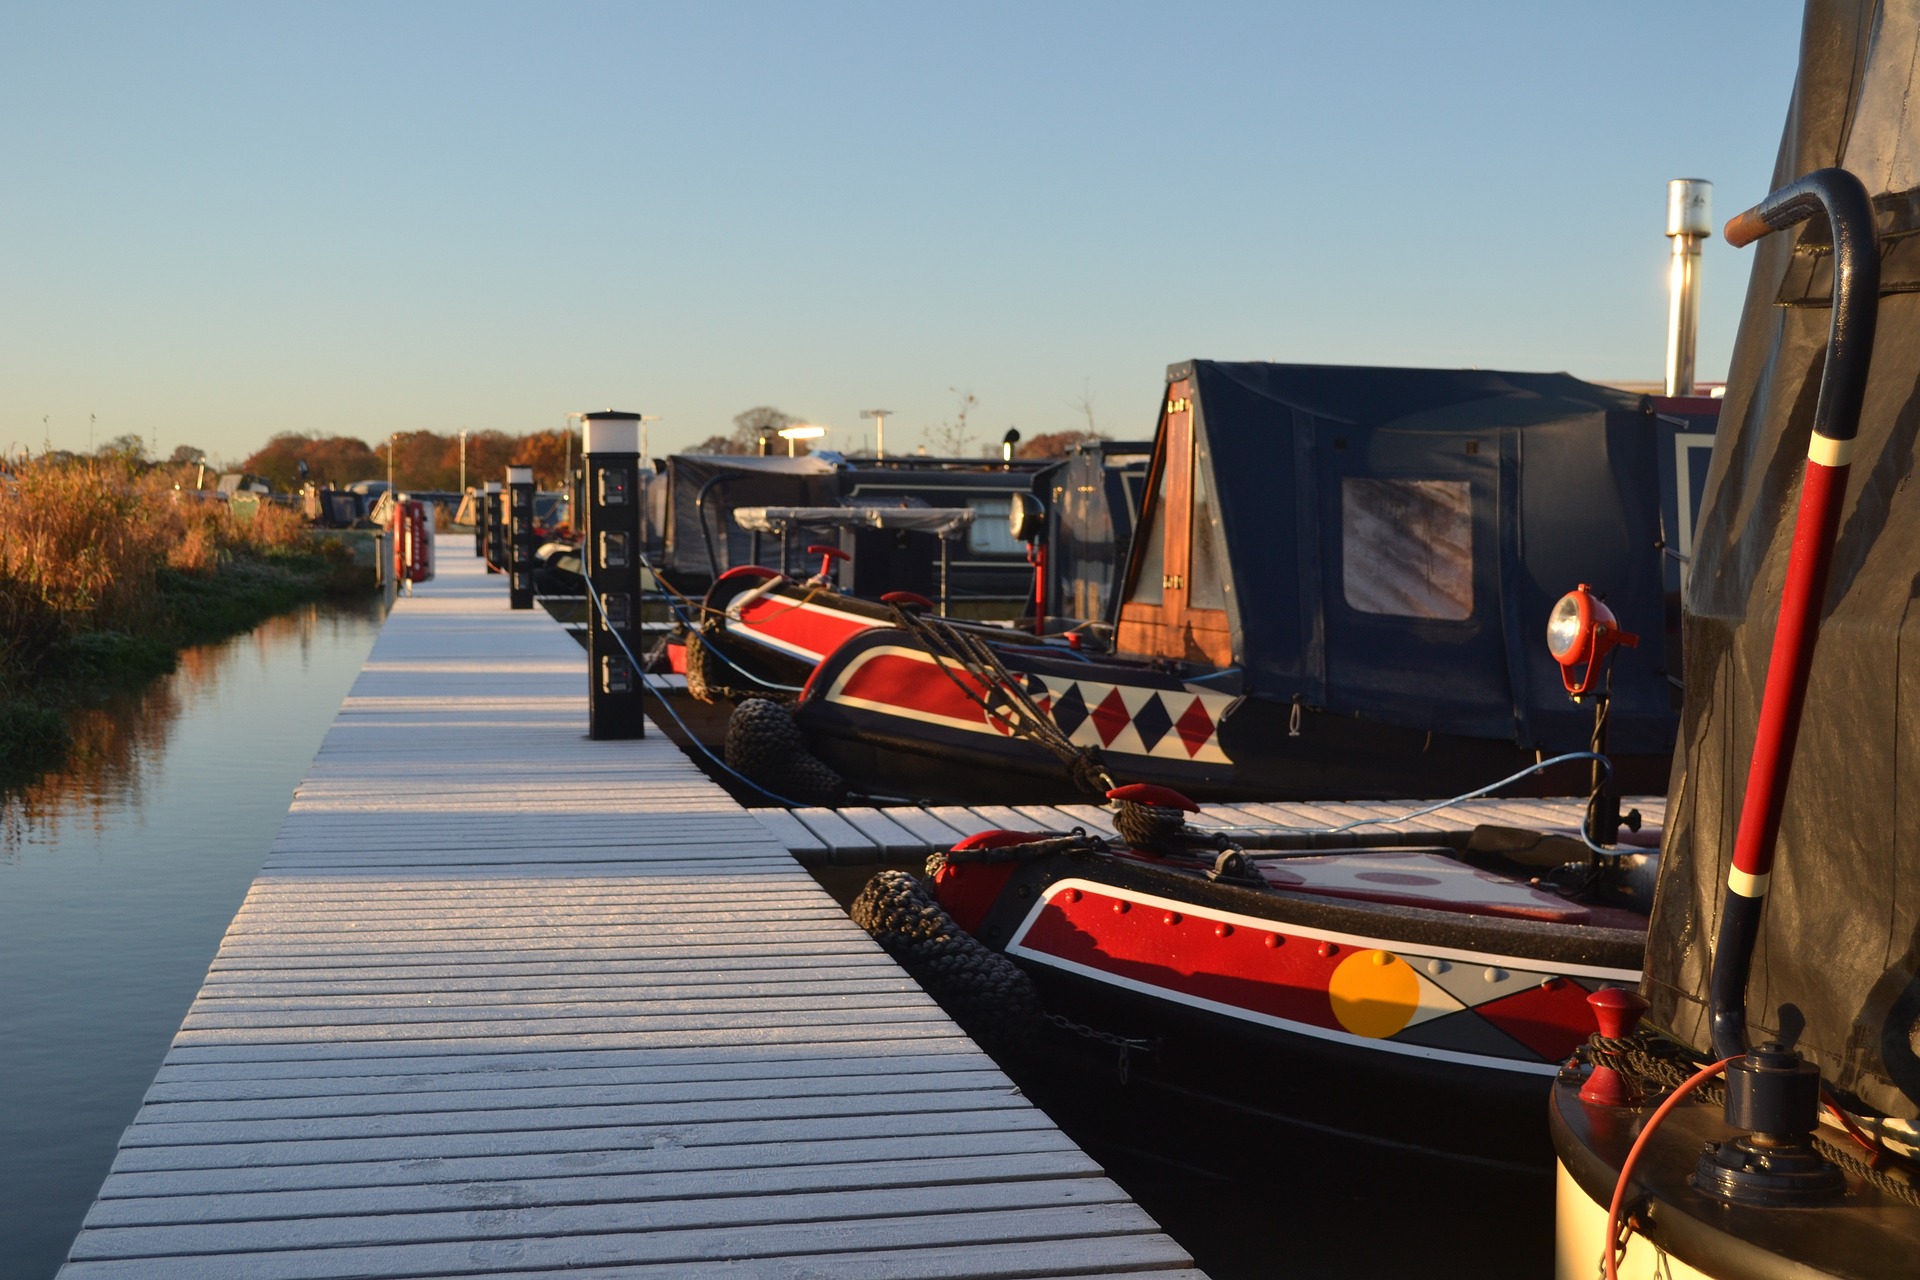 A row of narrowboats moored up for the evening. Brecknock Boat Services